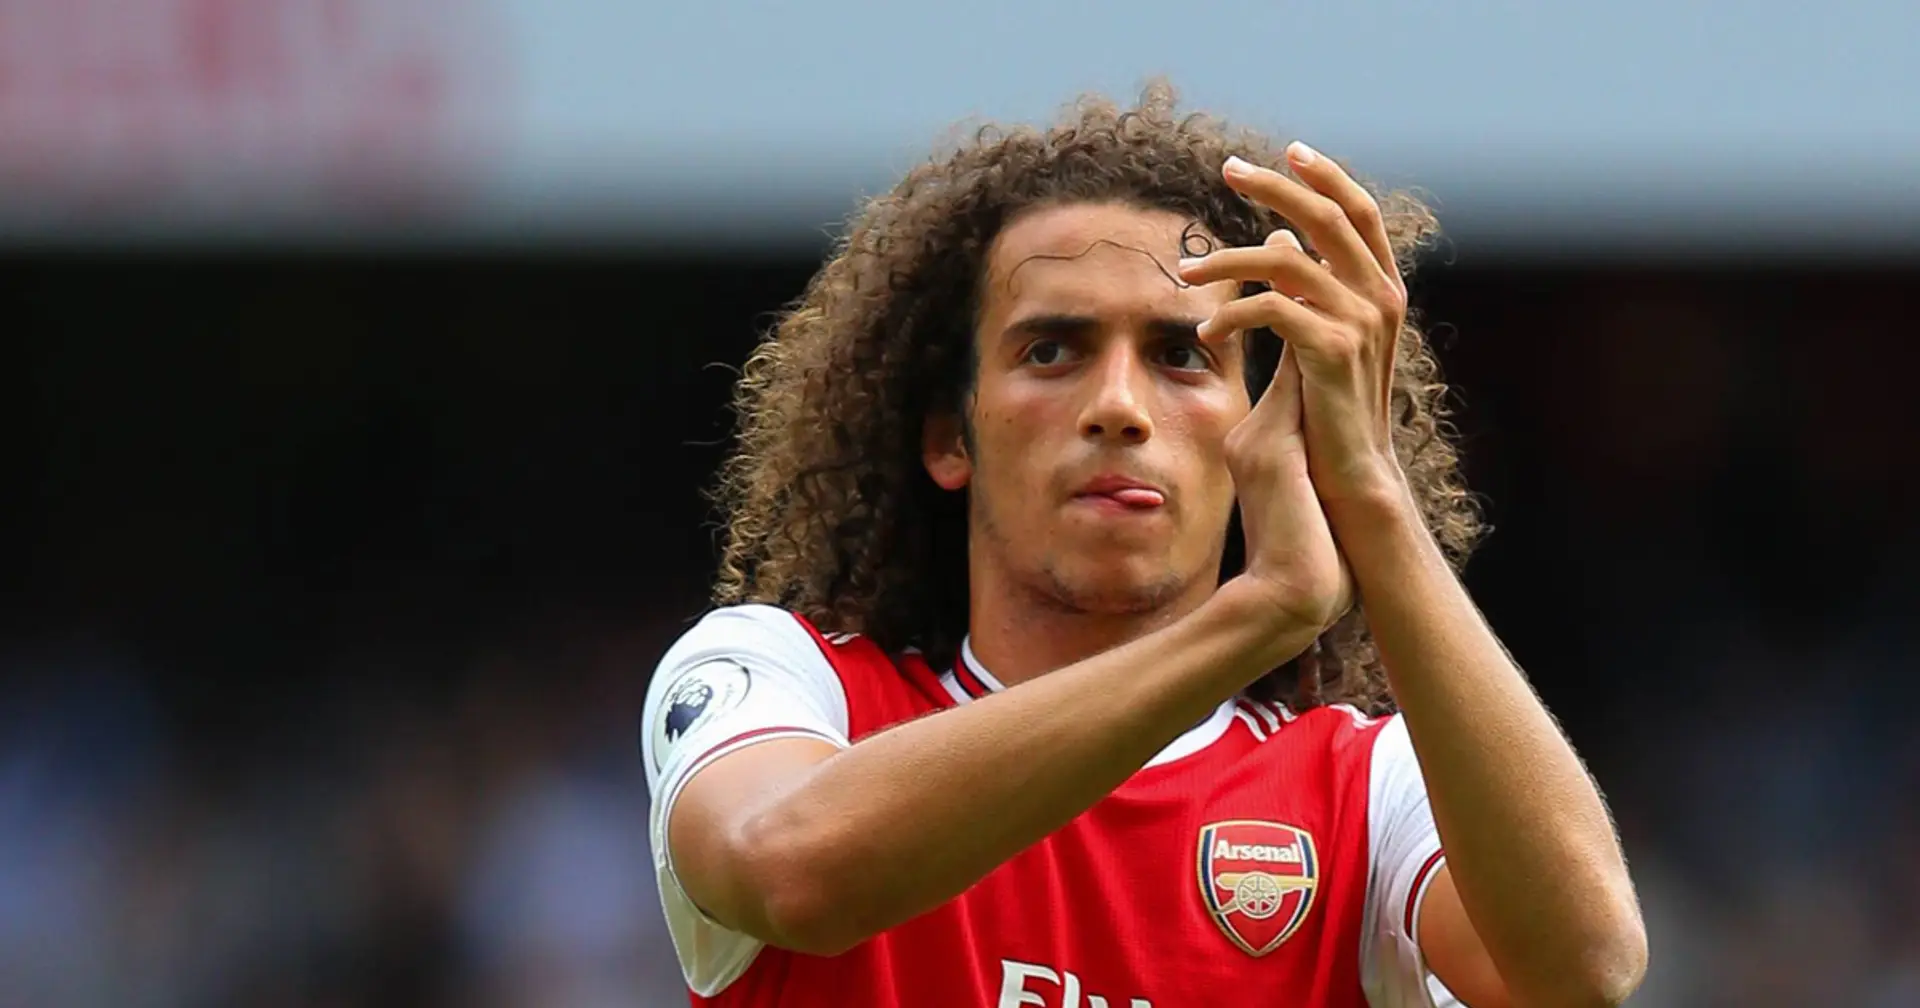 'Sometimes a child needs to be disciplined': Arsenal fans hopeful for Guendouzi redemption